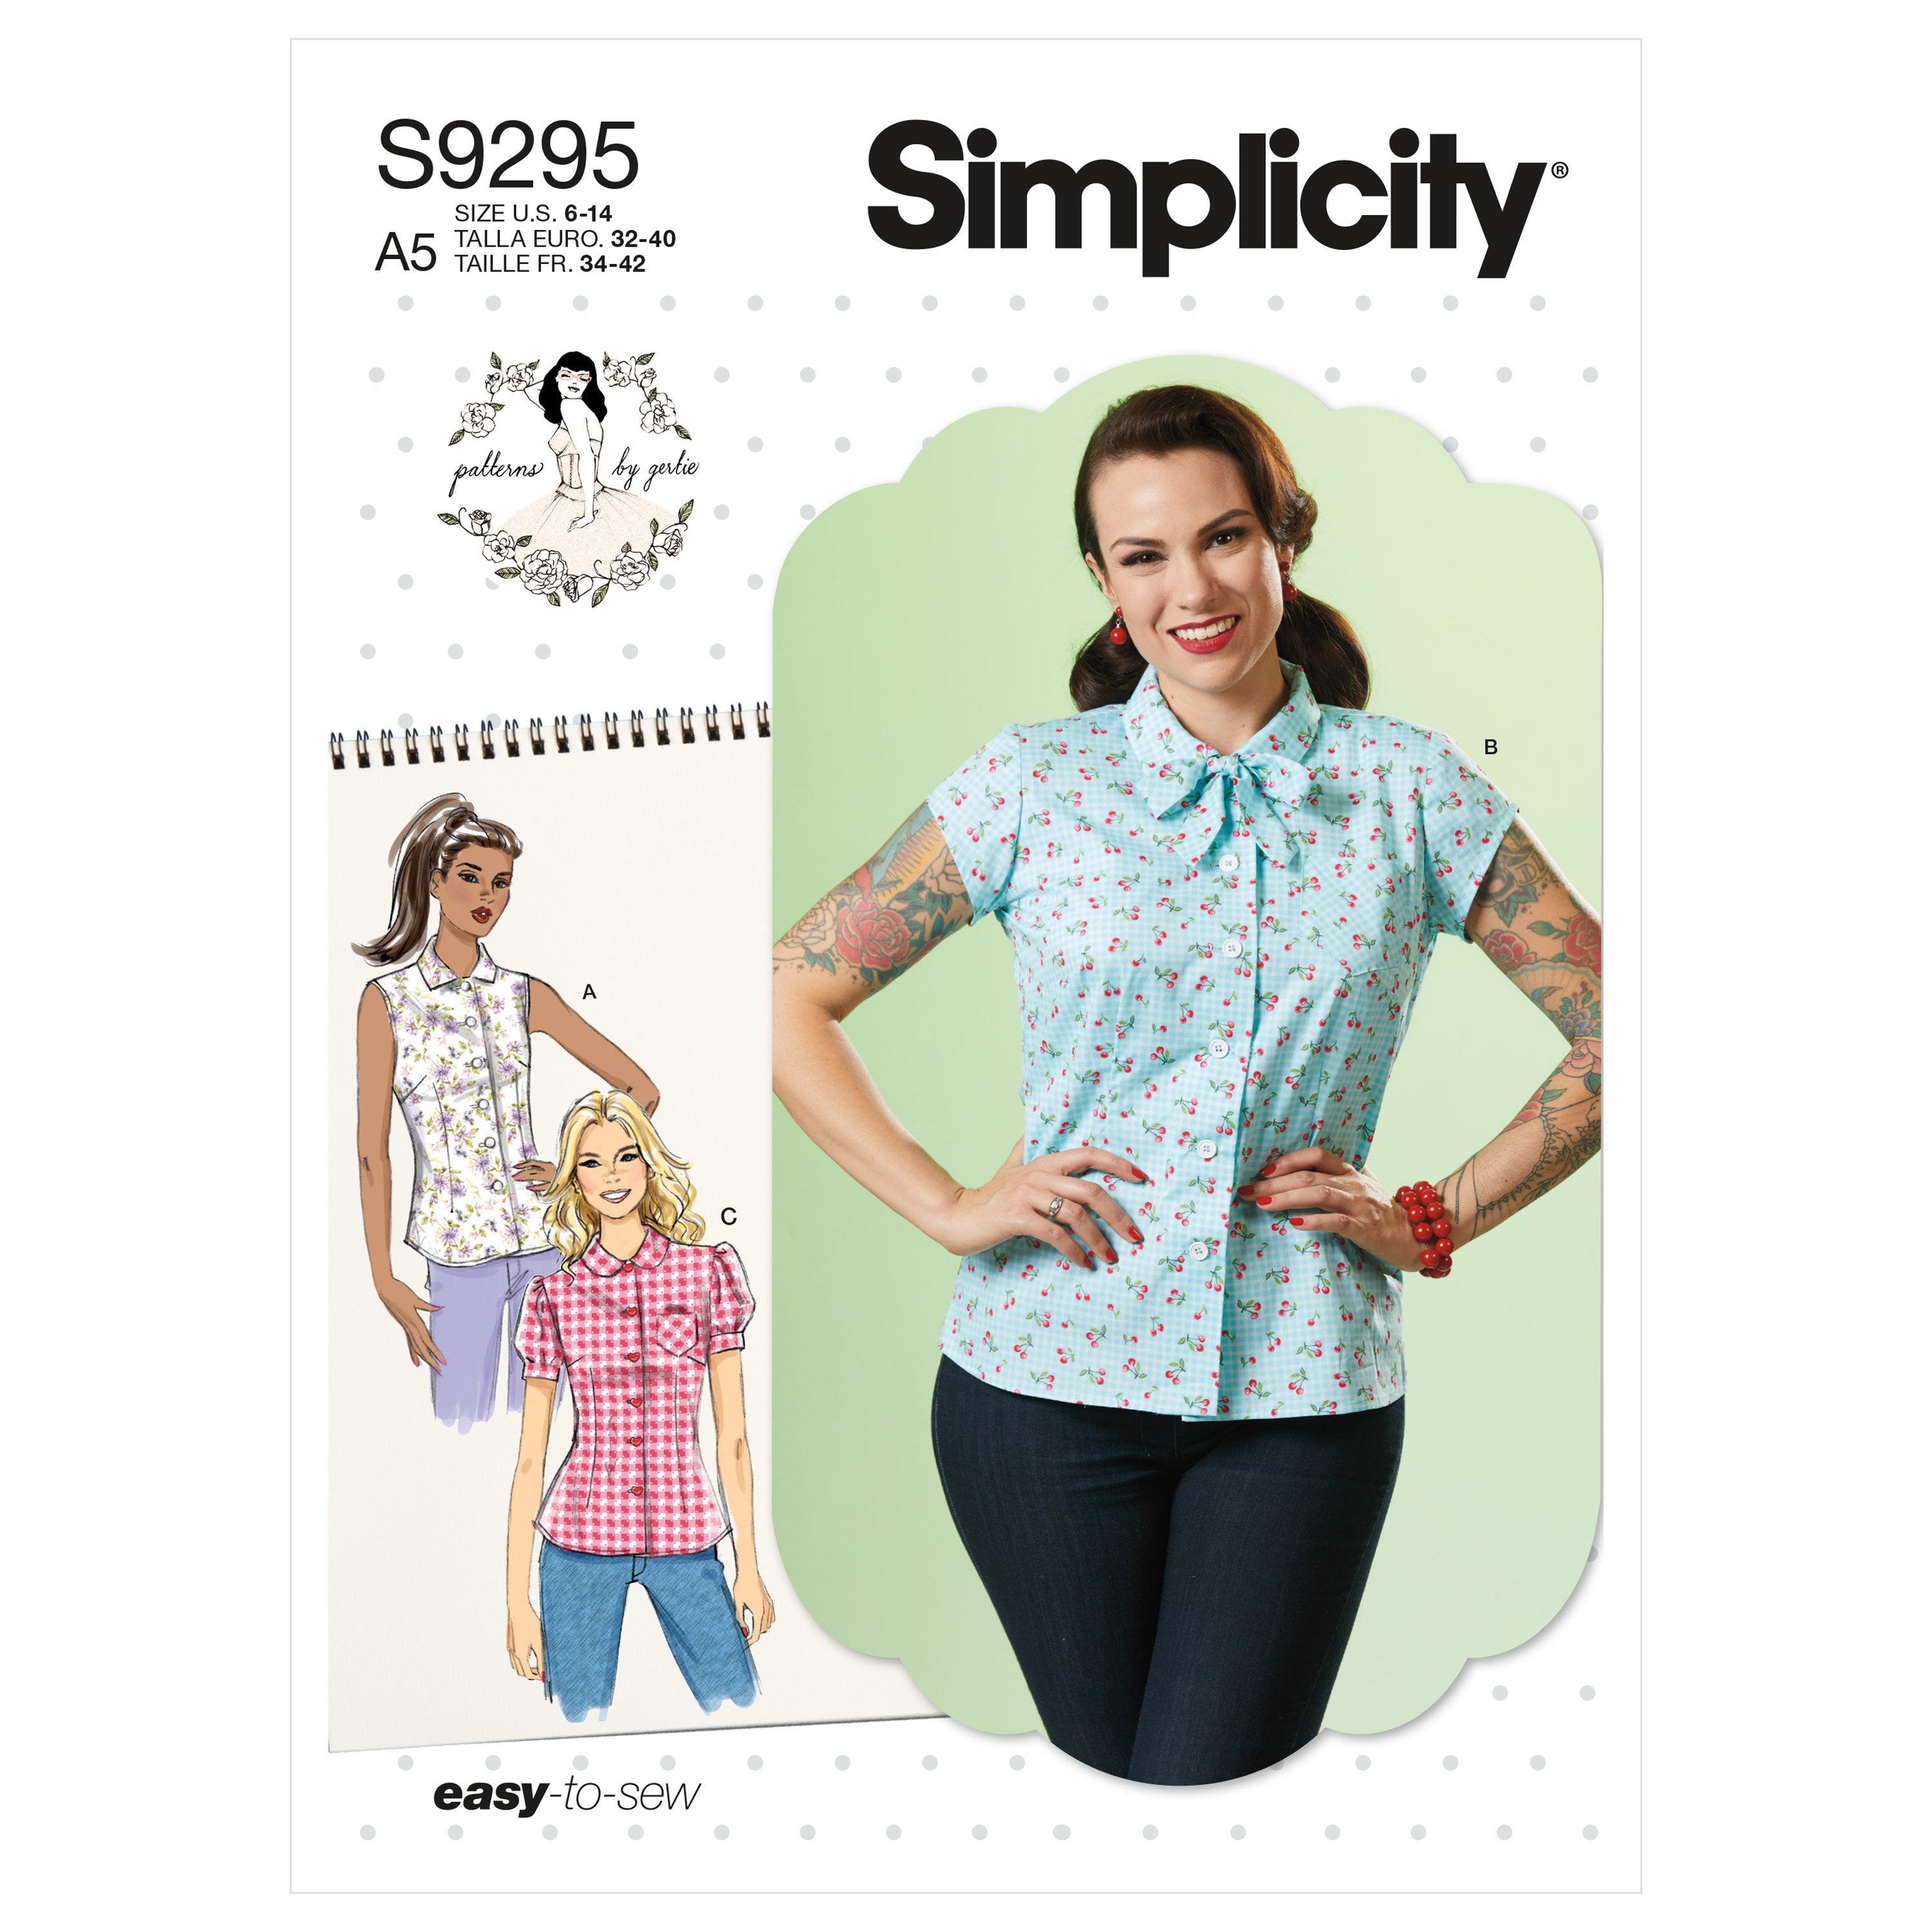 Simplicity 1950's Sewing Pattern 9295 Vintage Tops from Jaycotts Sewing Supplies